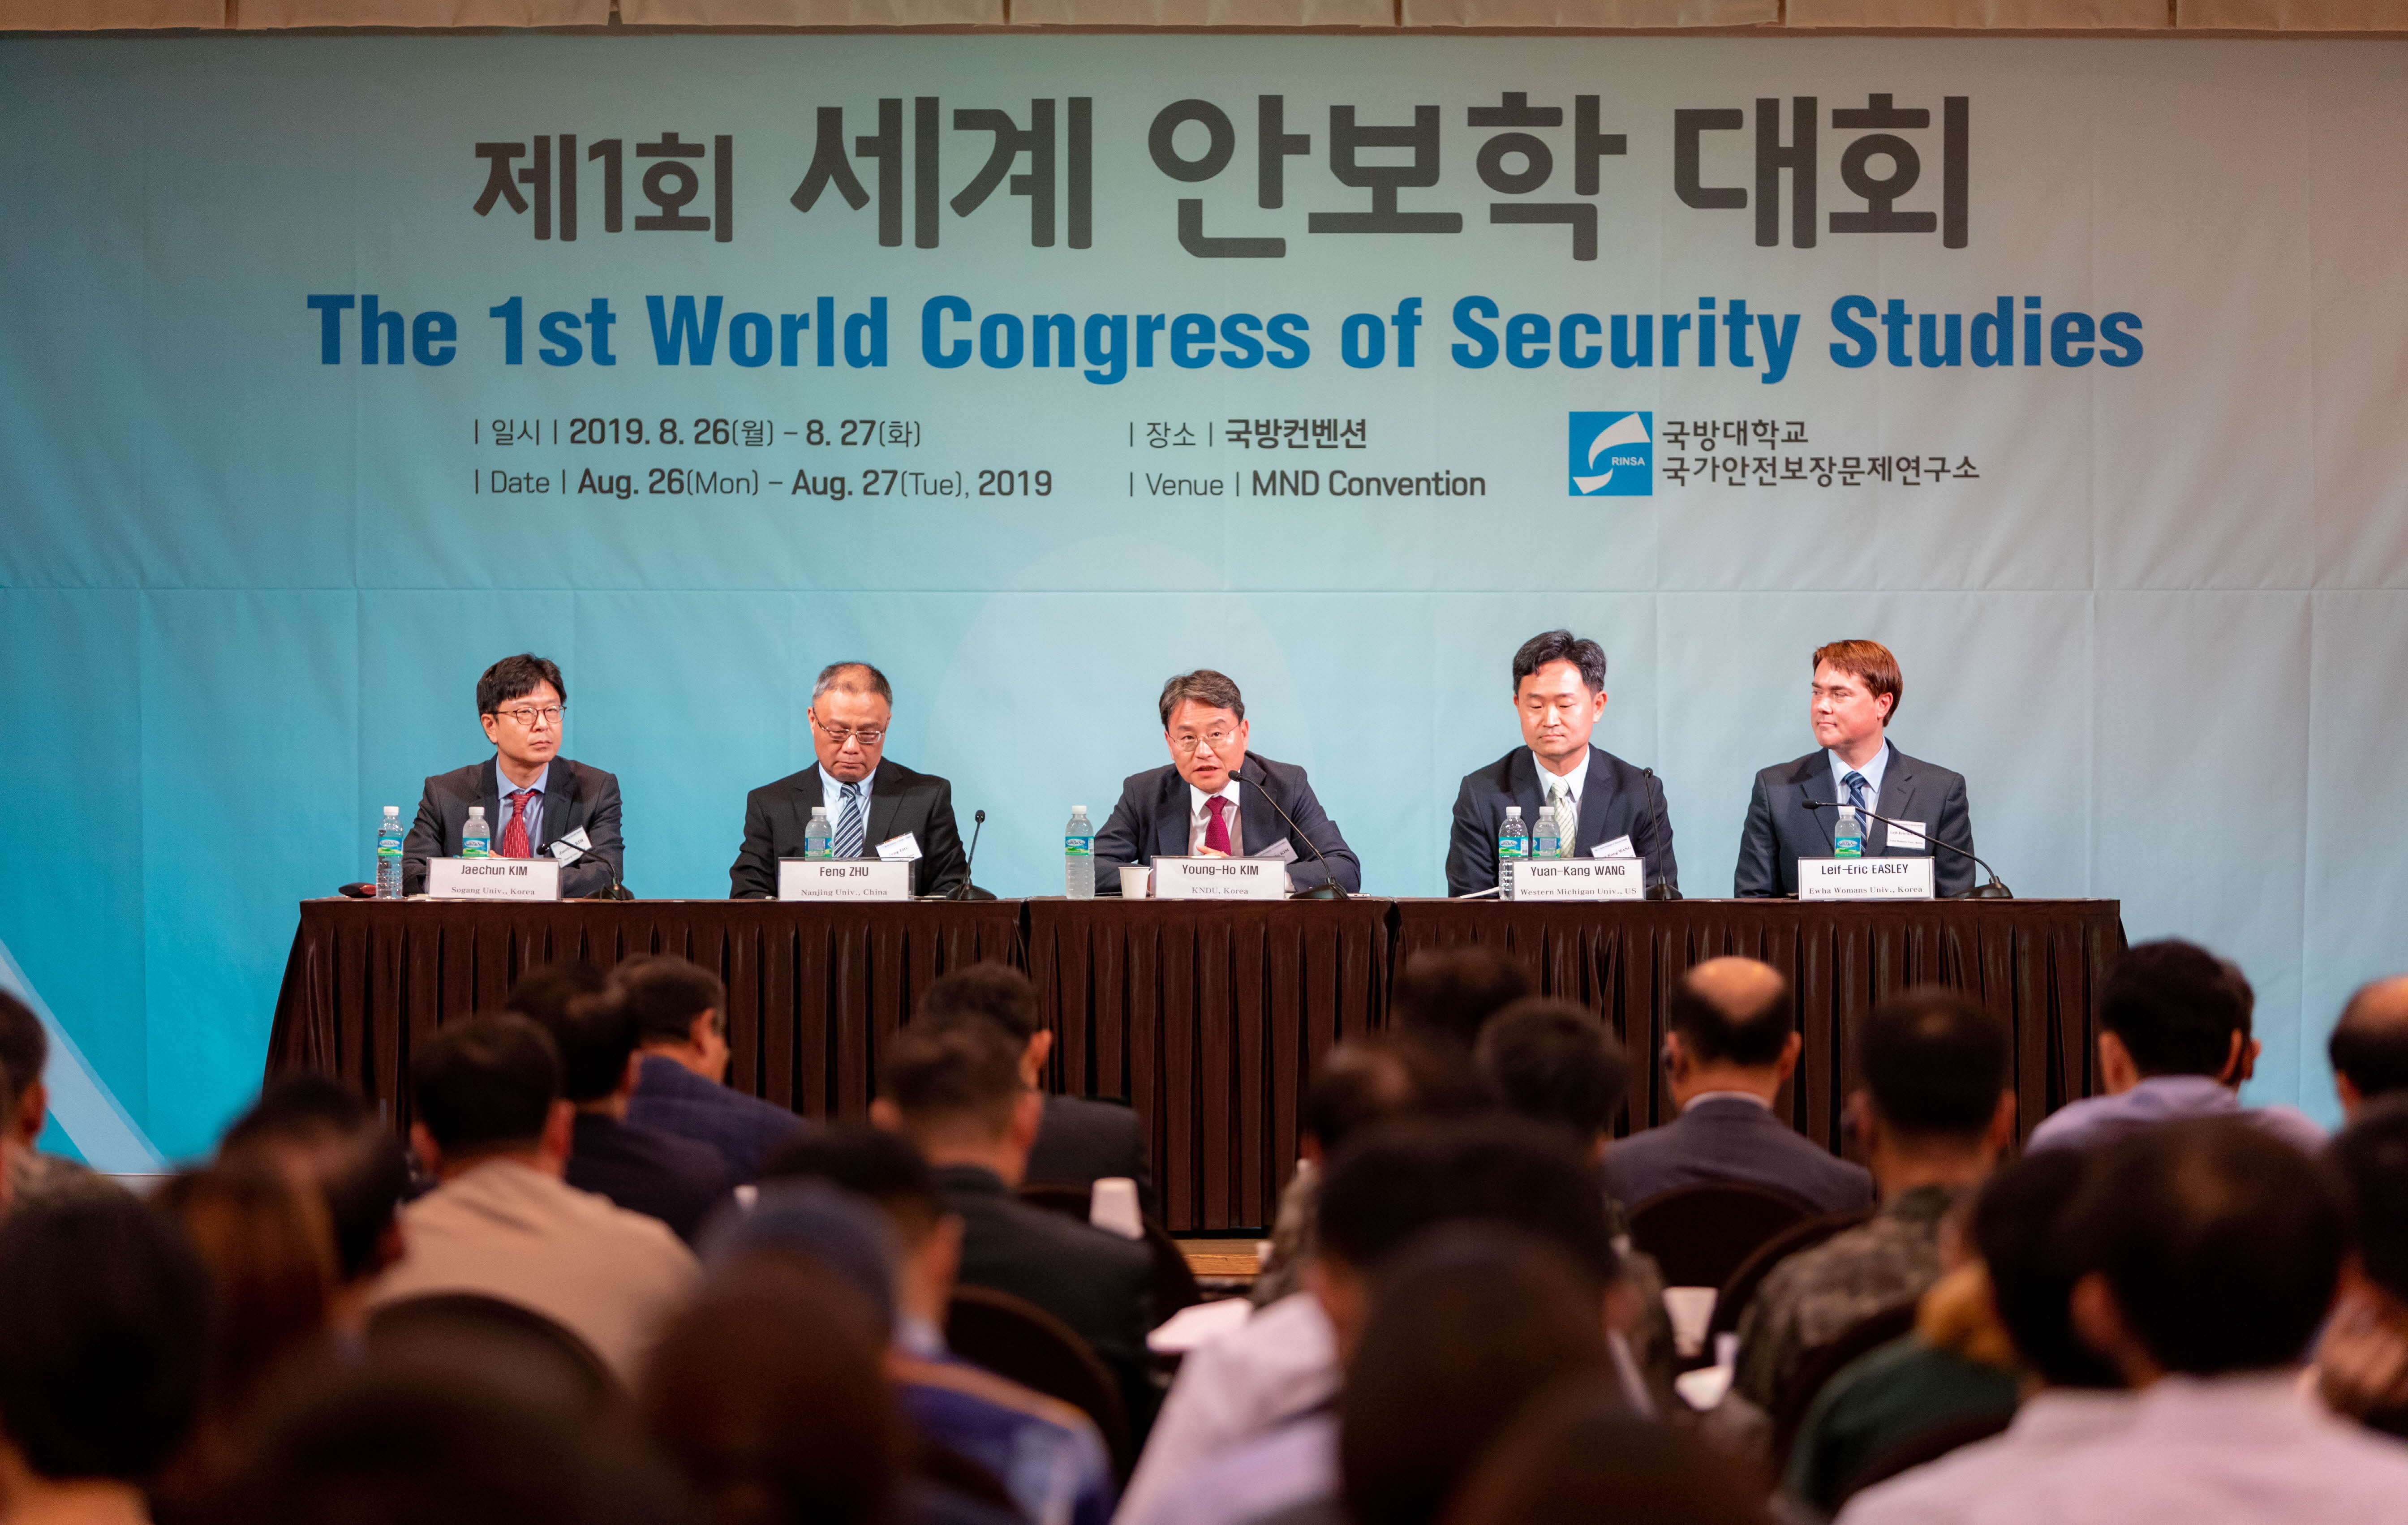 Session #1-2 : East Asian Security: Realist’s Perspective